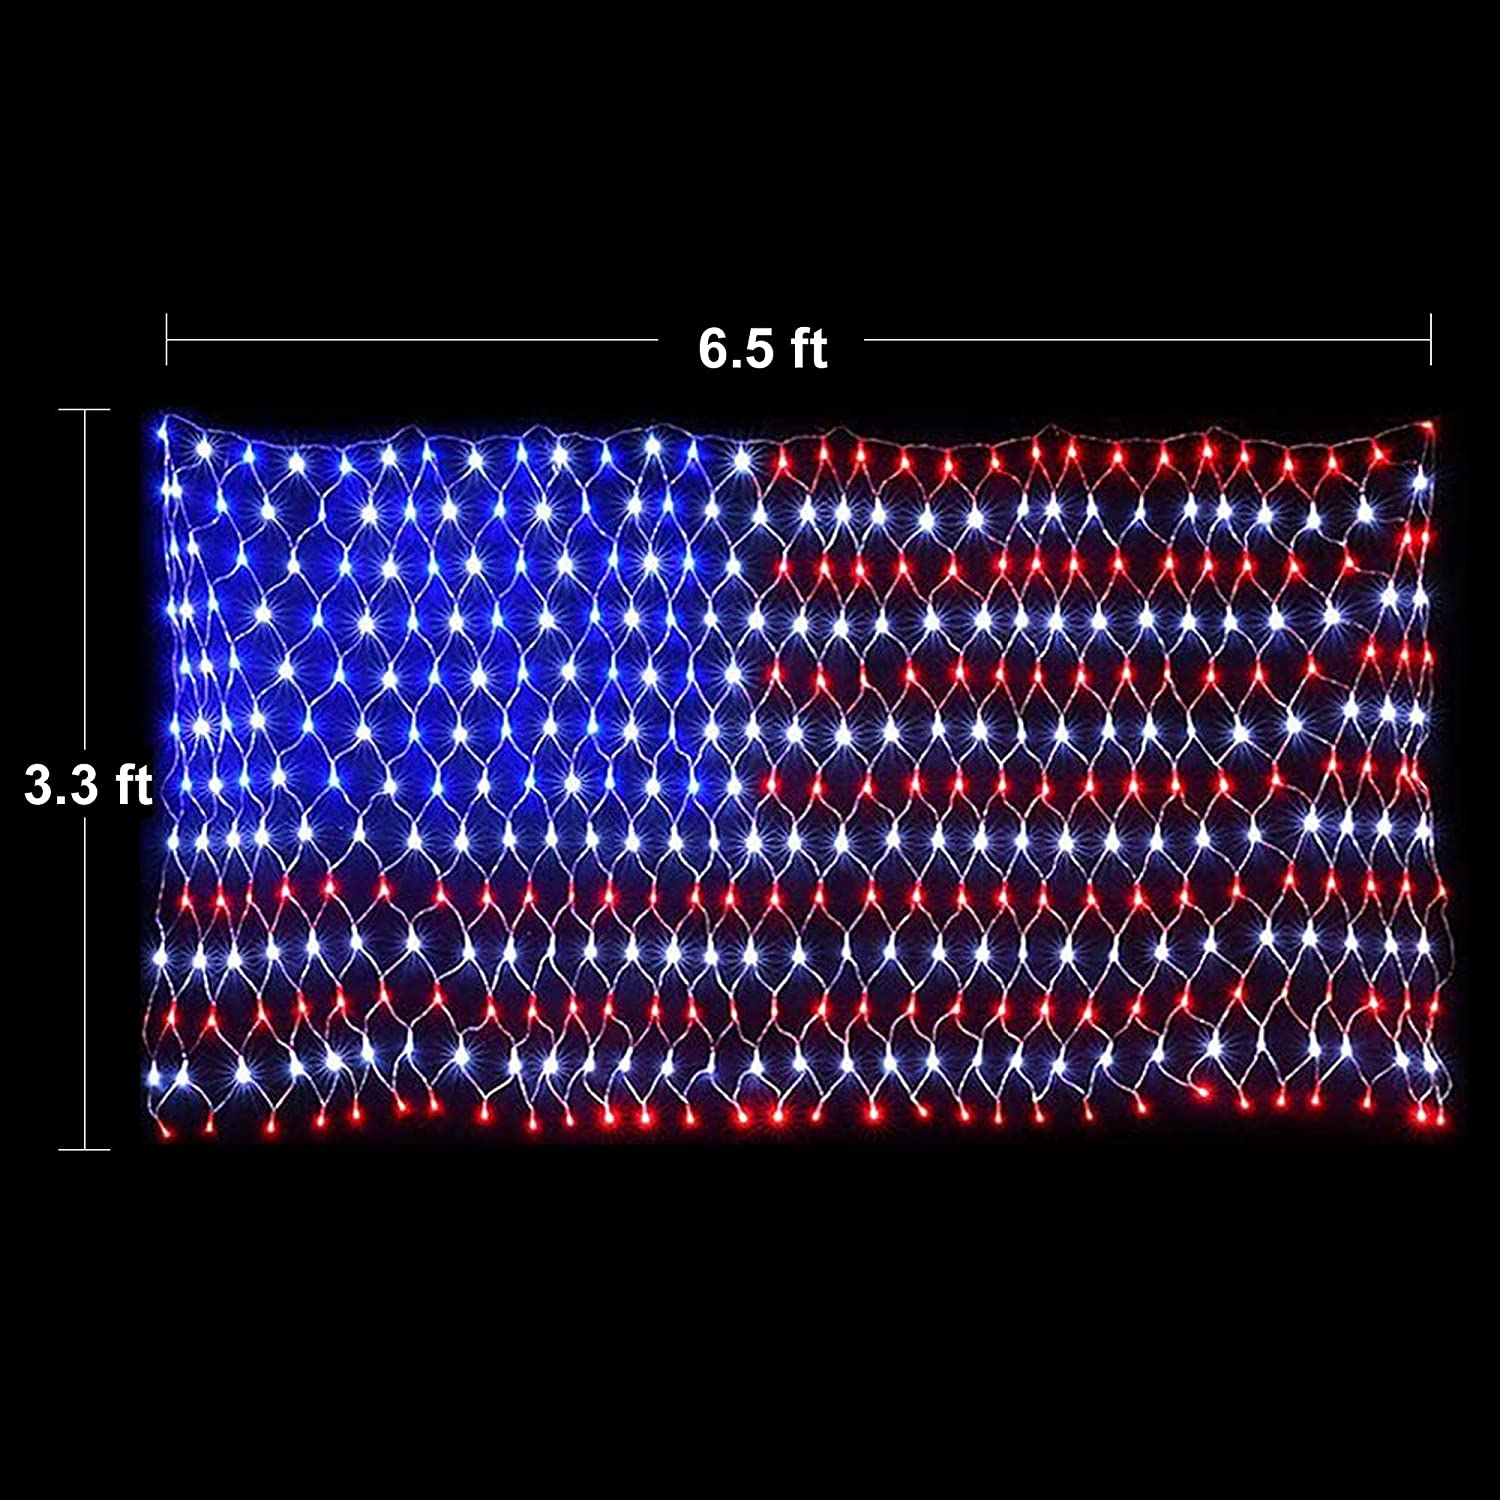 6.5ft3.3ft 420LED American Flag Net Lights String Light Waterproof for Christmas, Holiday, Independence Day, Memorial Day, Decoration, Garden, Yard, Indoor Outdoor - image 2 of 3